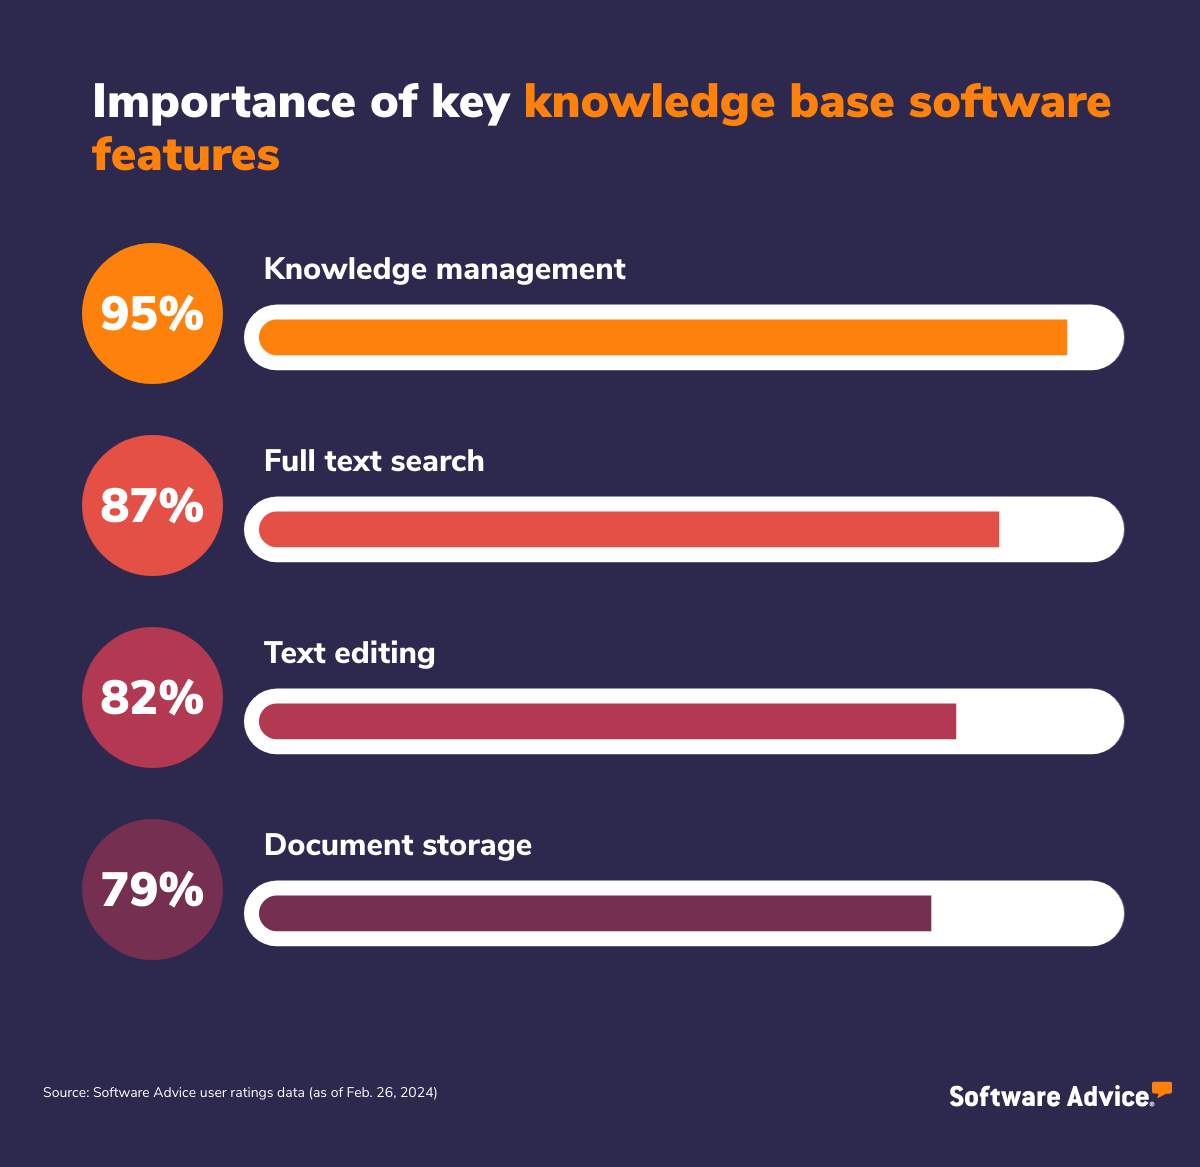 Importance of key knowledge base software features